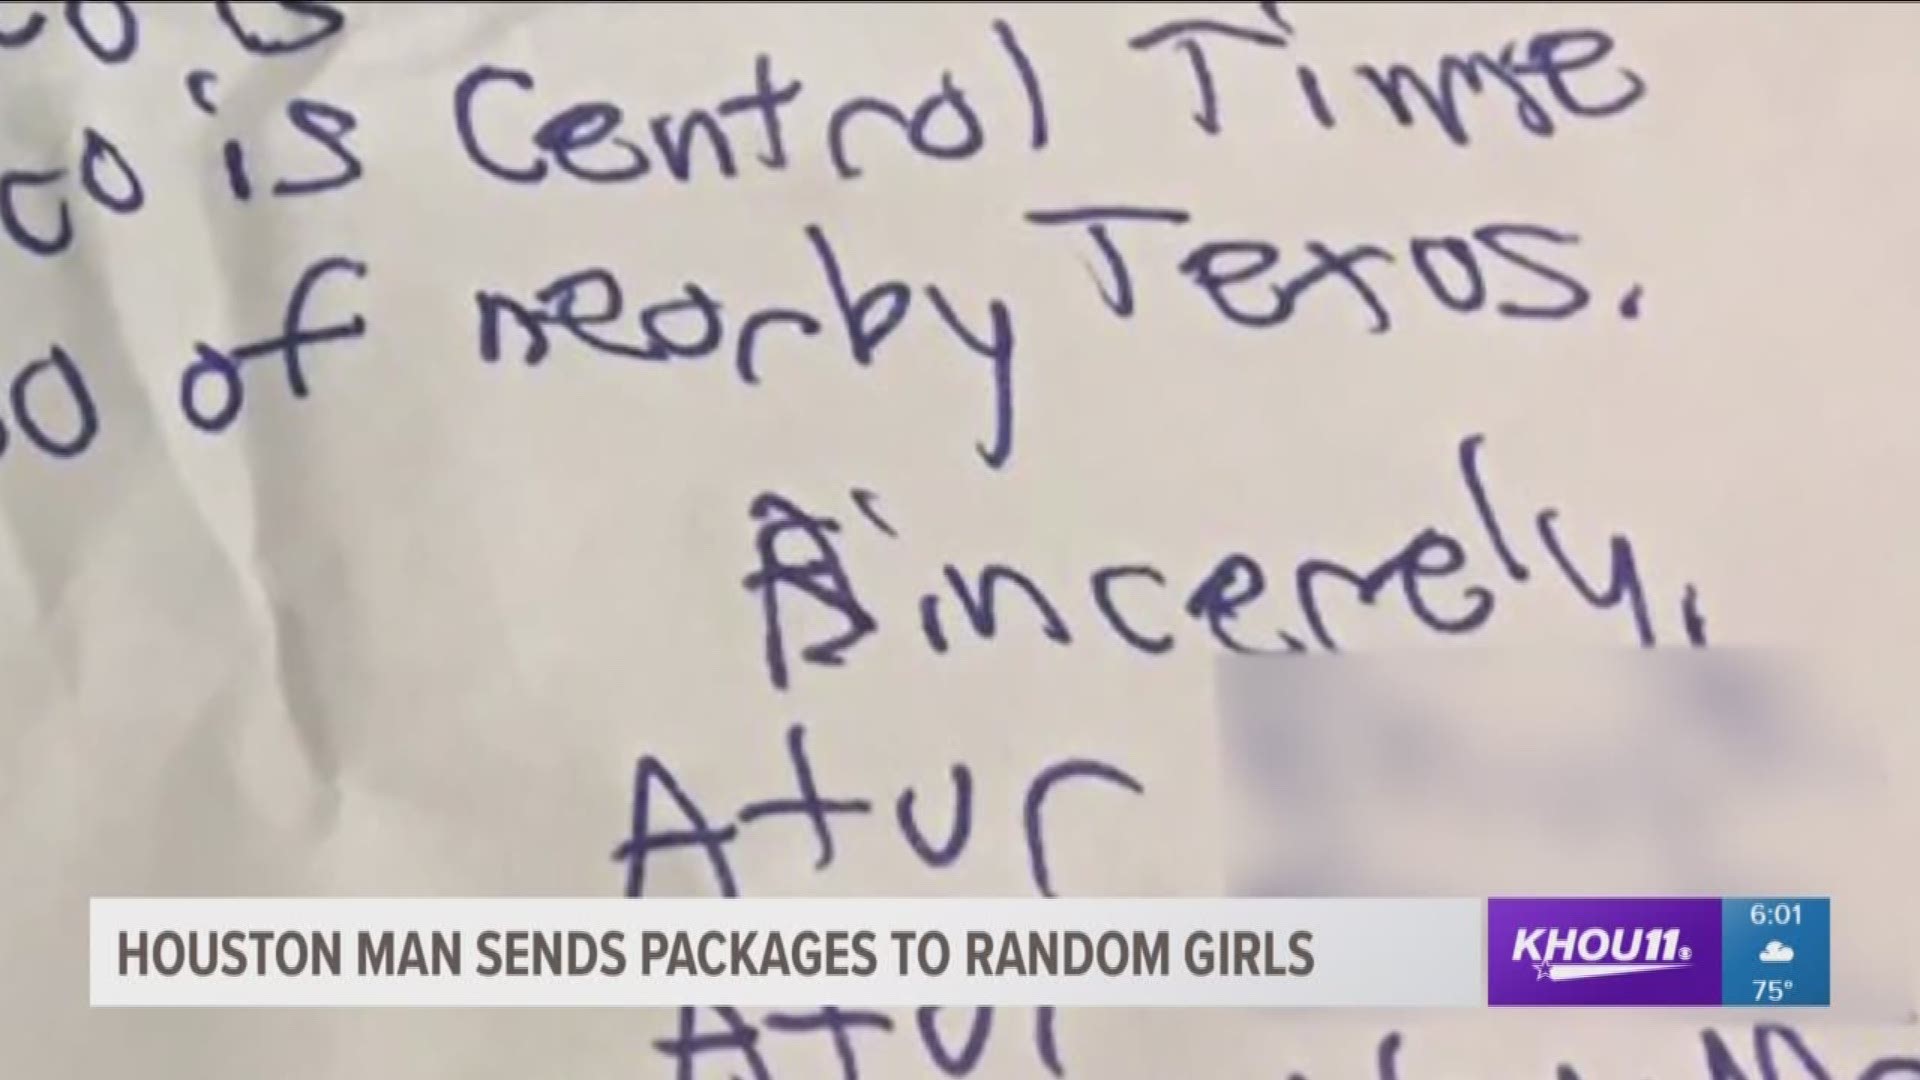 The FBI believed a man was targeting dozens of girls across the county by sending them strange packages. They soon discovered the man is mentally ill and poses no threat. 